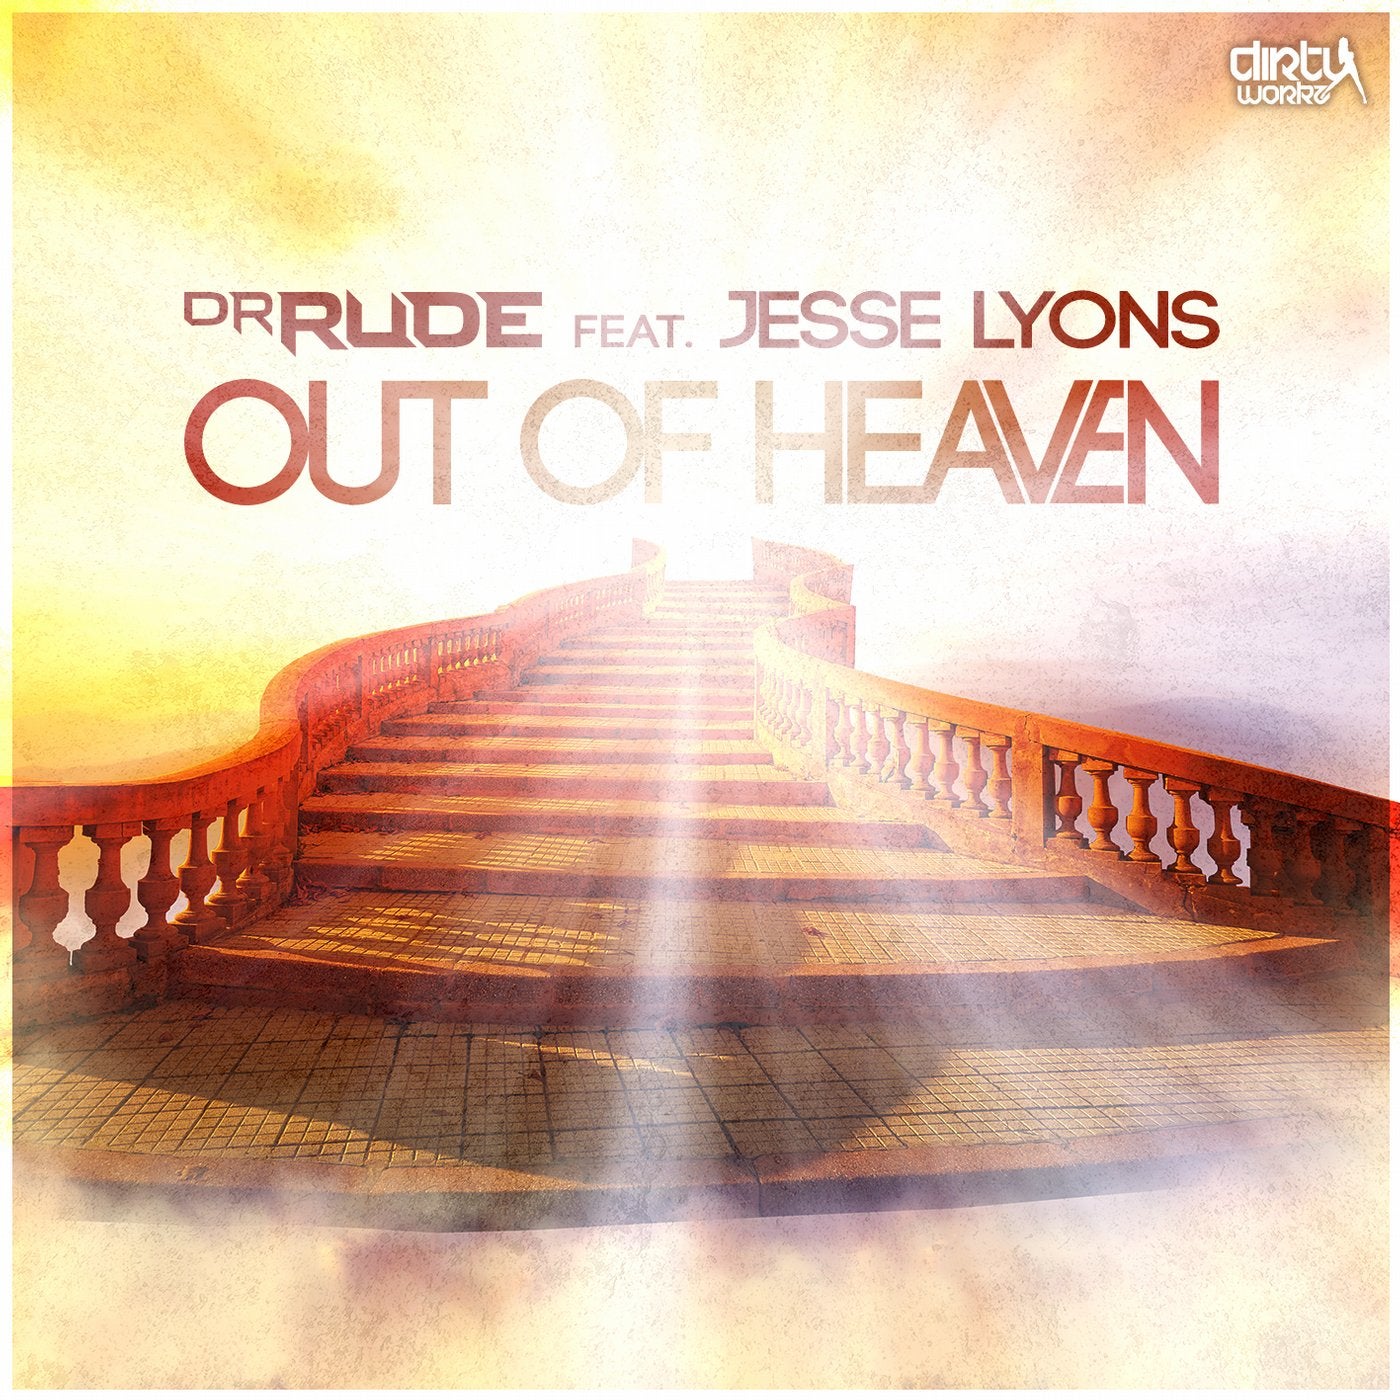 Feat jess. Out of Heaven. Out песни. Look out of Heaven обложка. Look out of Heaven обложка песни.